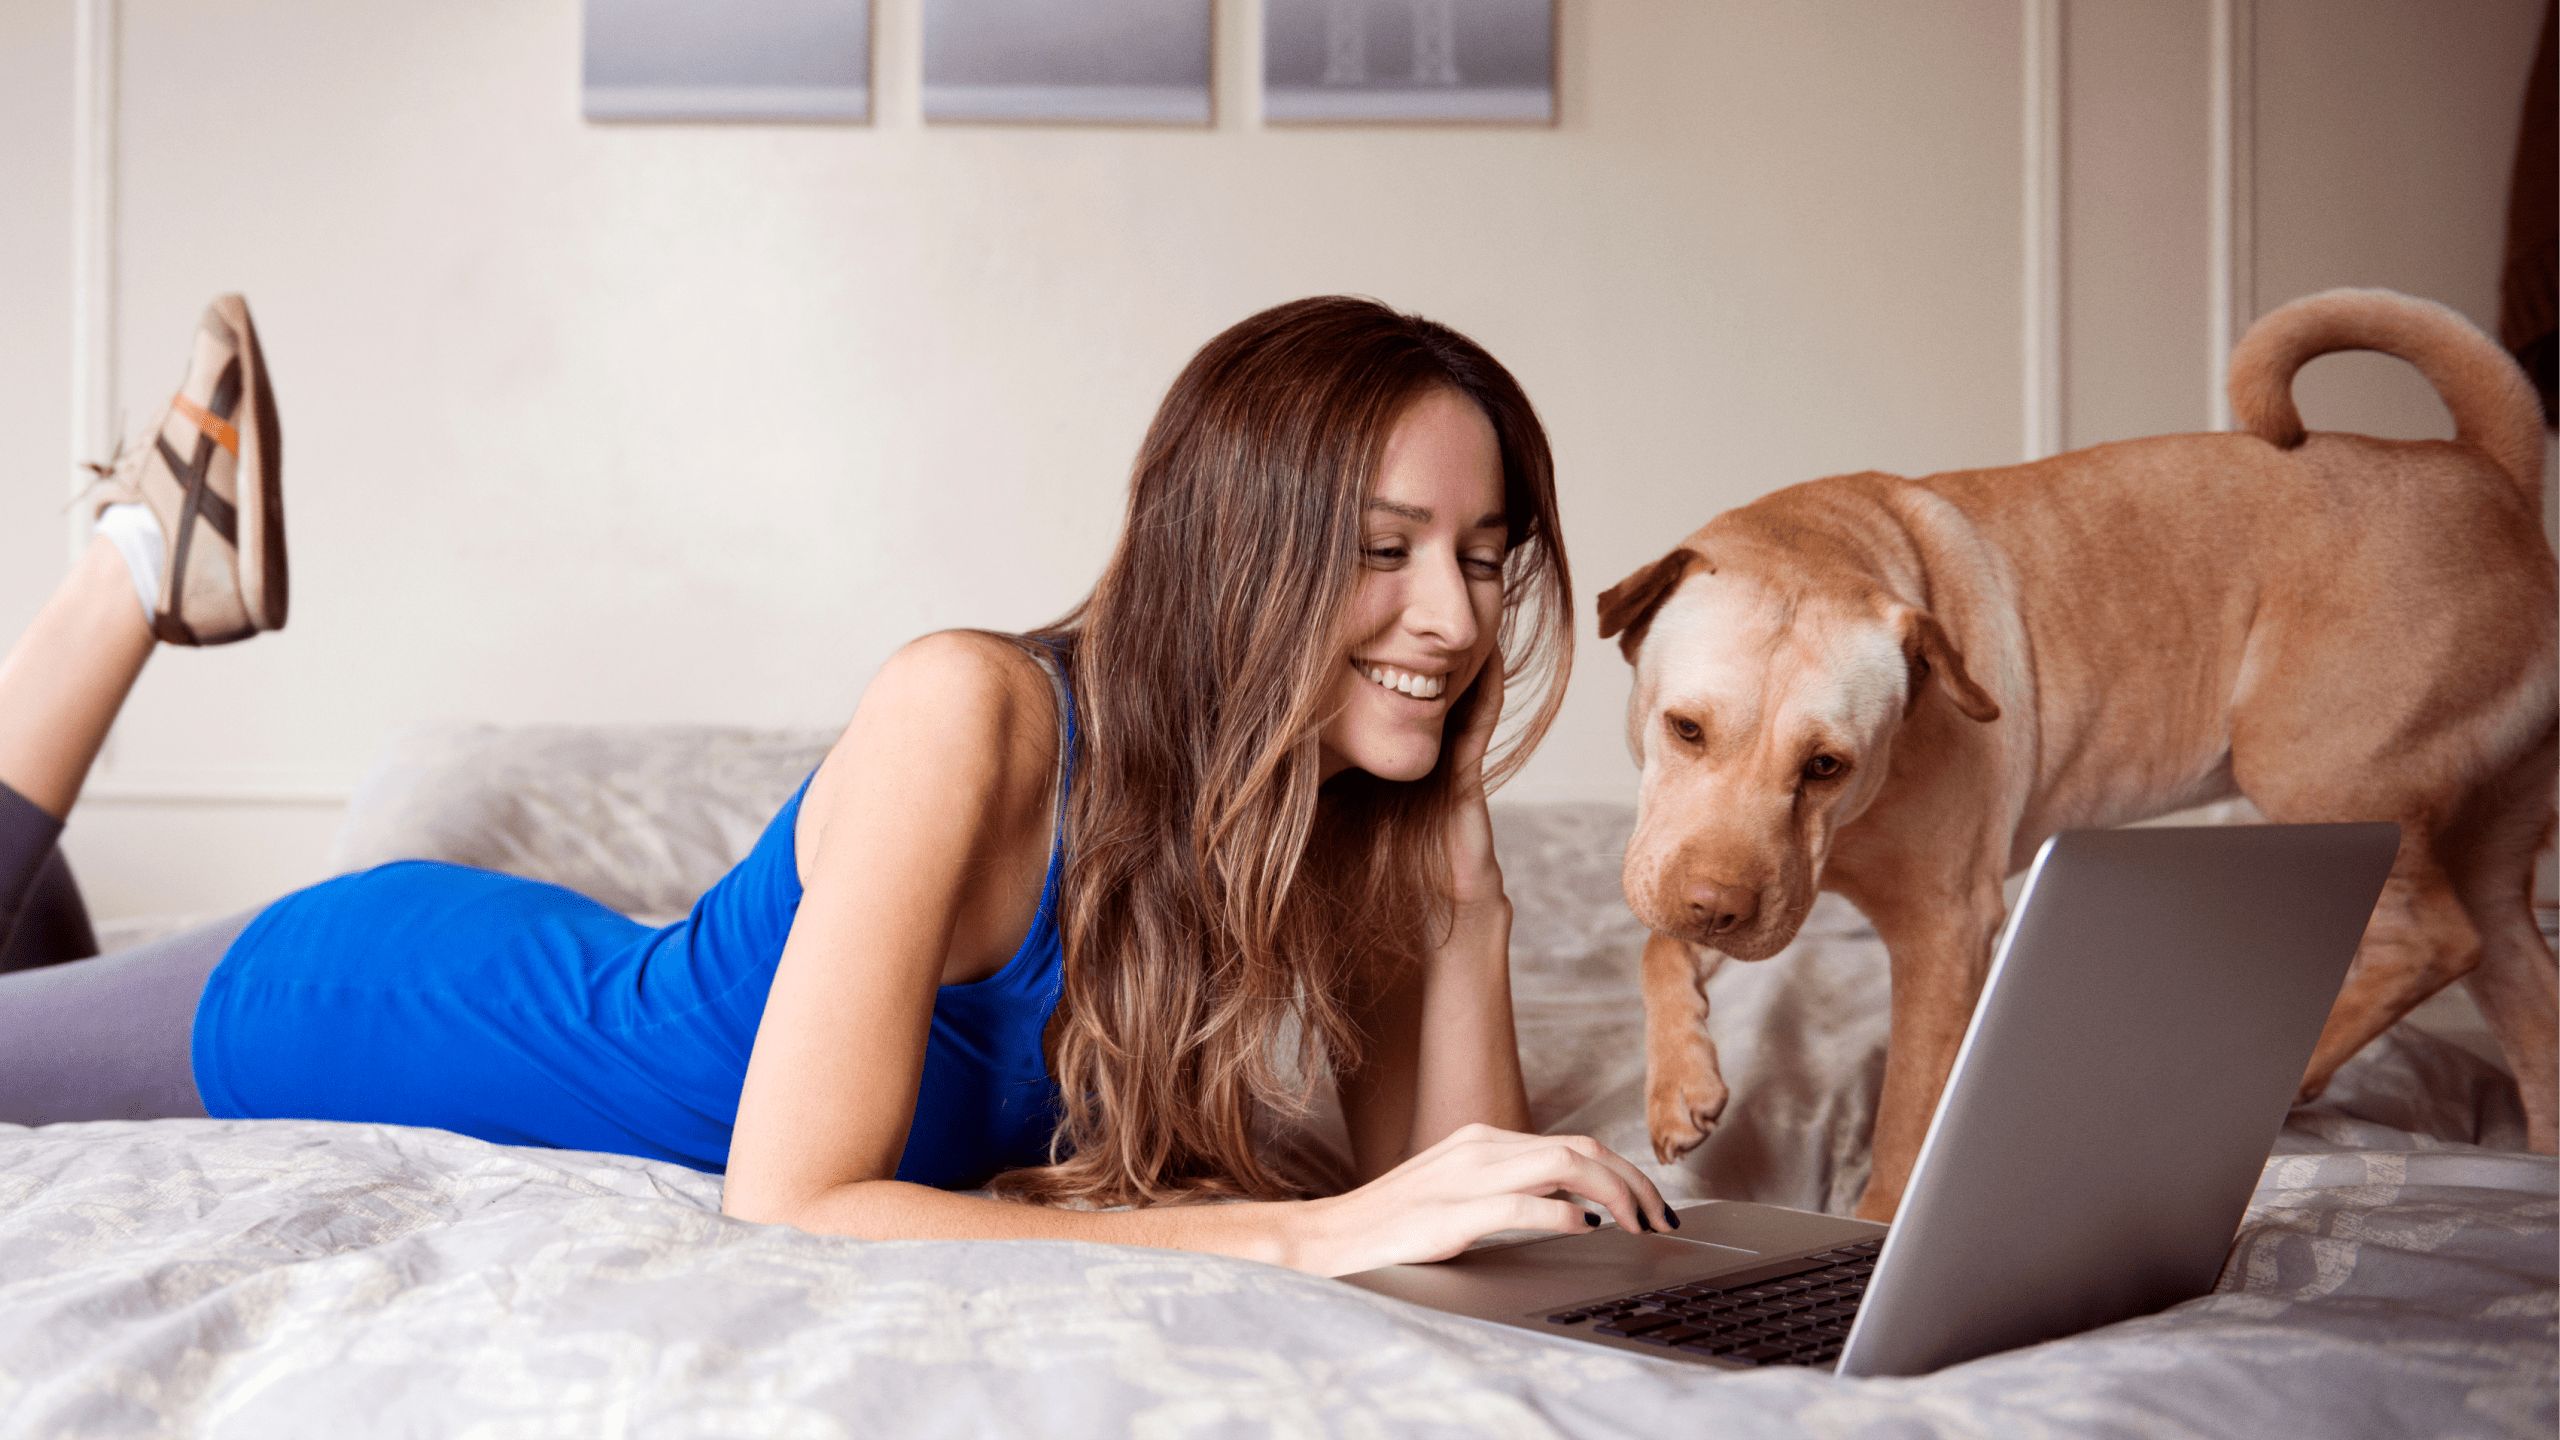 An image of a woman on her laptop with her dog